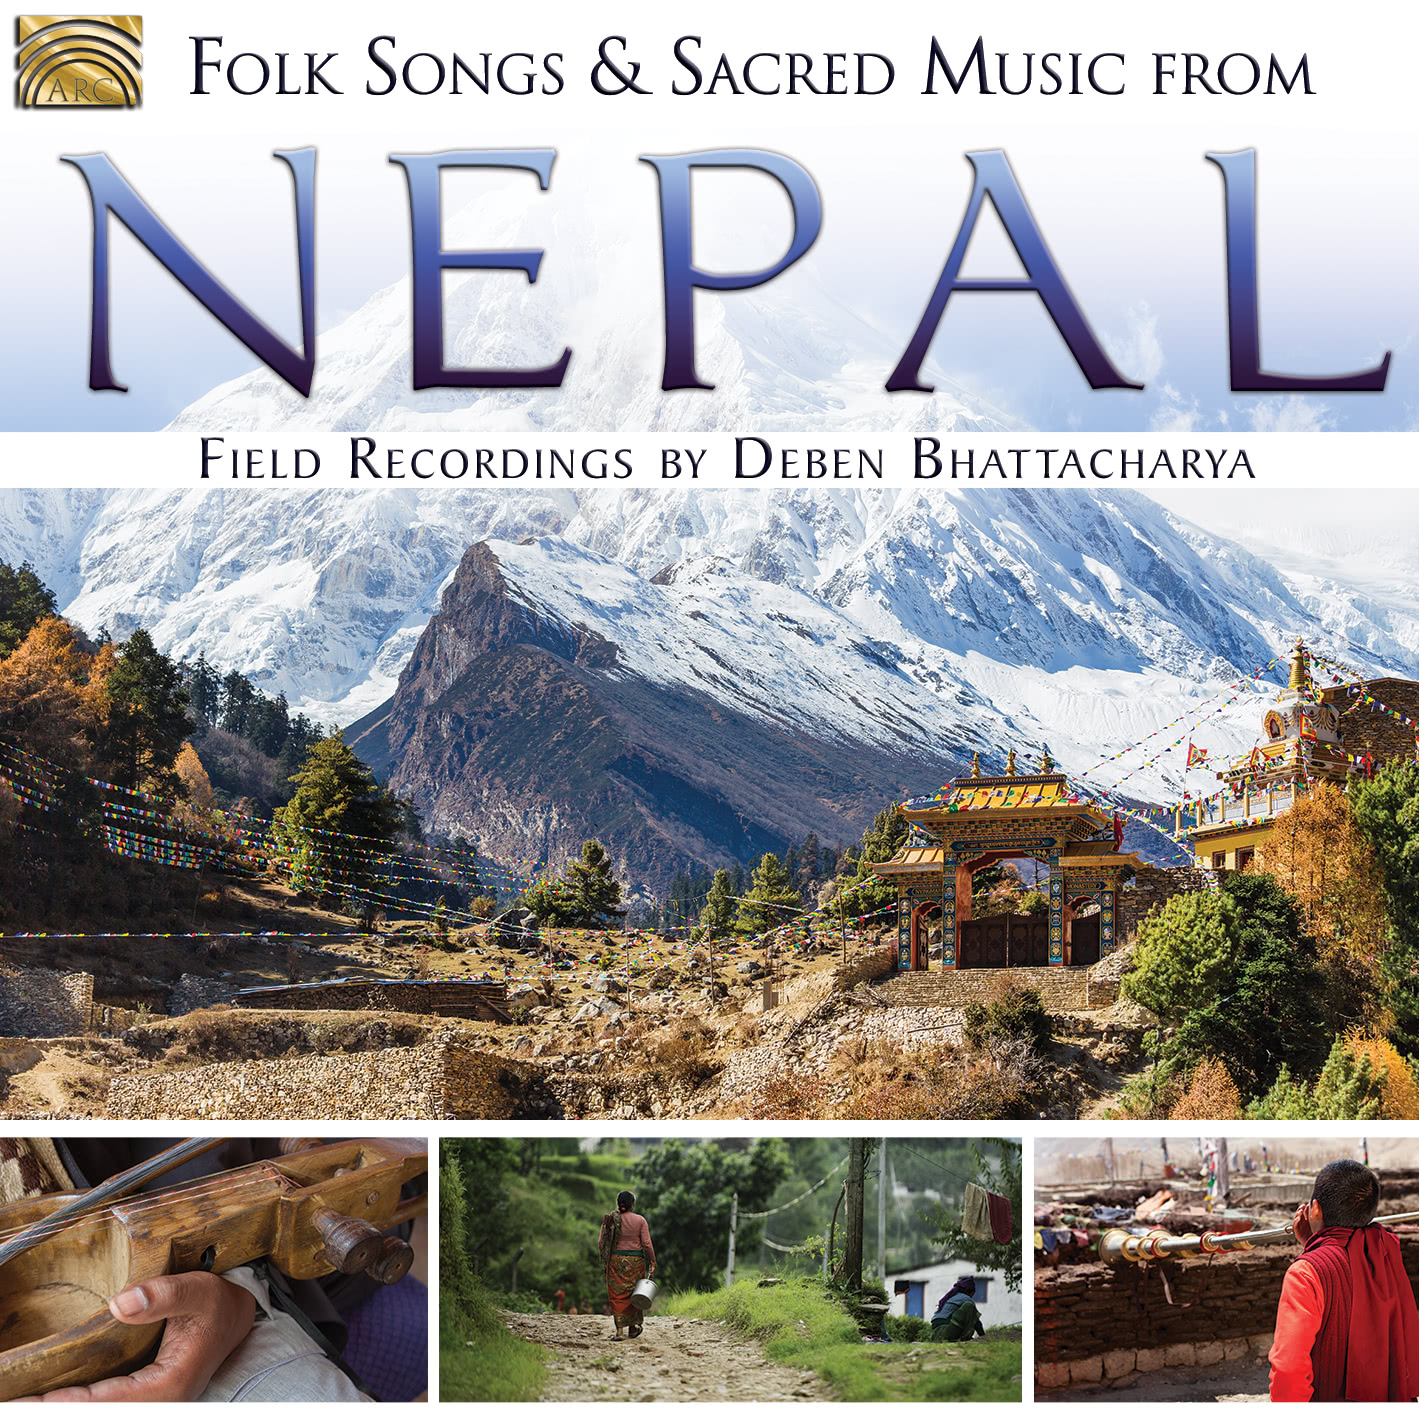 EUCD2711 Folksongs & Sacred Music from Nepal